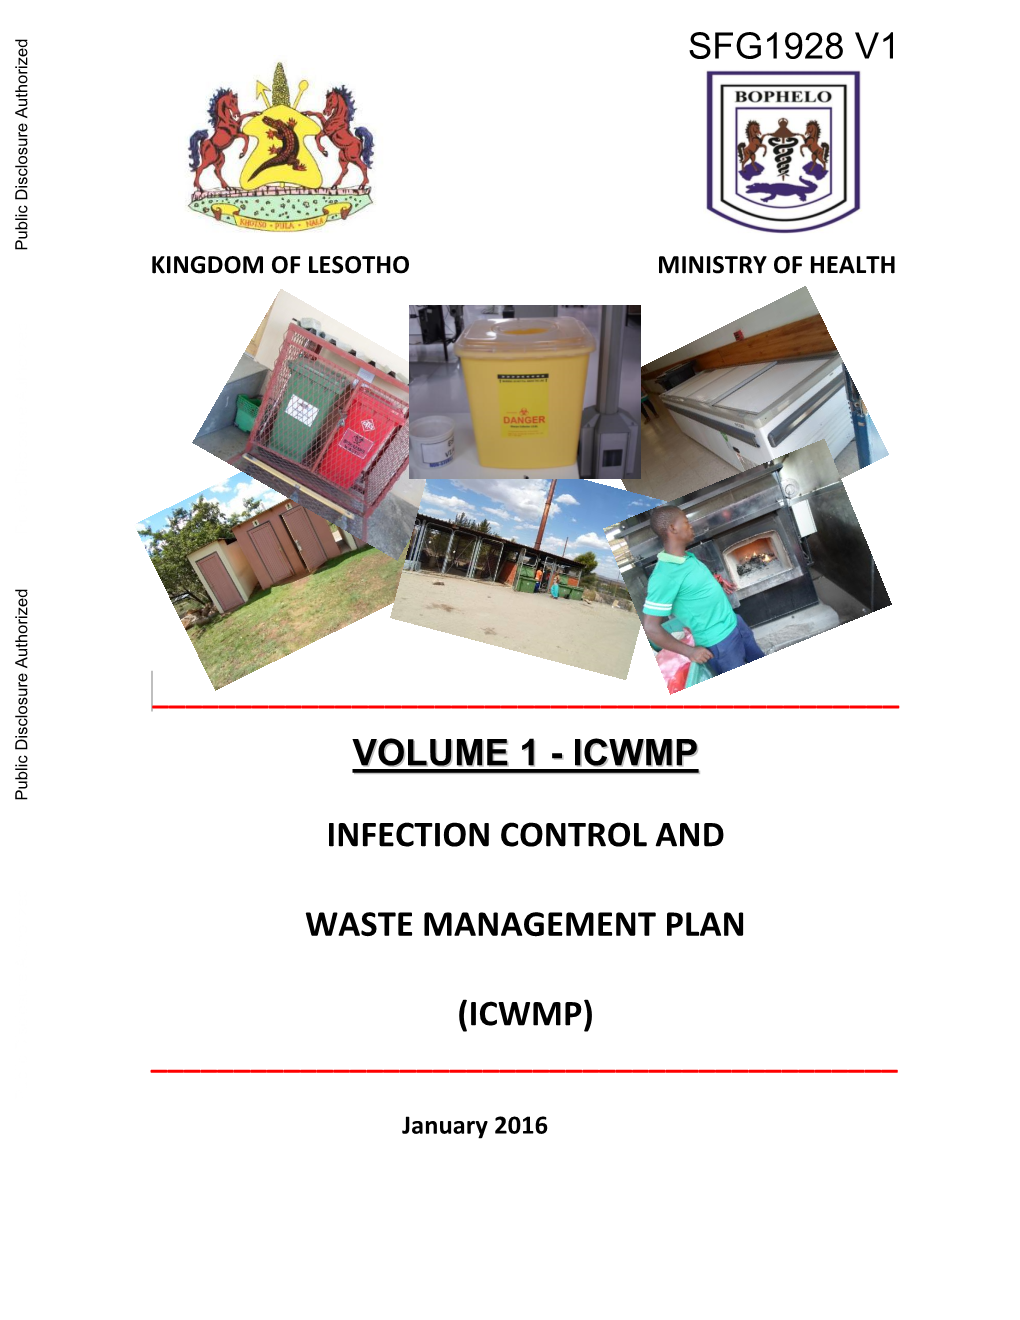 ICWMP Infection Control and Waste Management Plan IMR Infant Mortality Rate